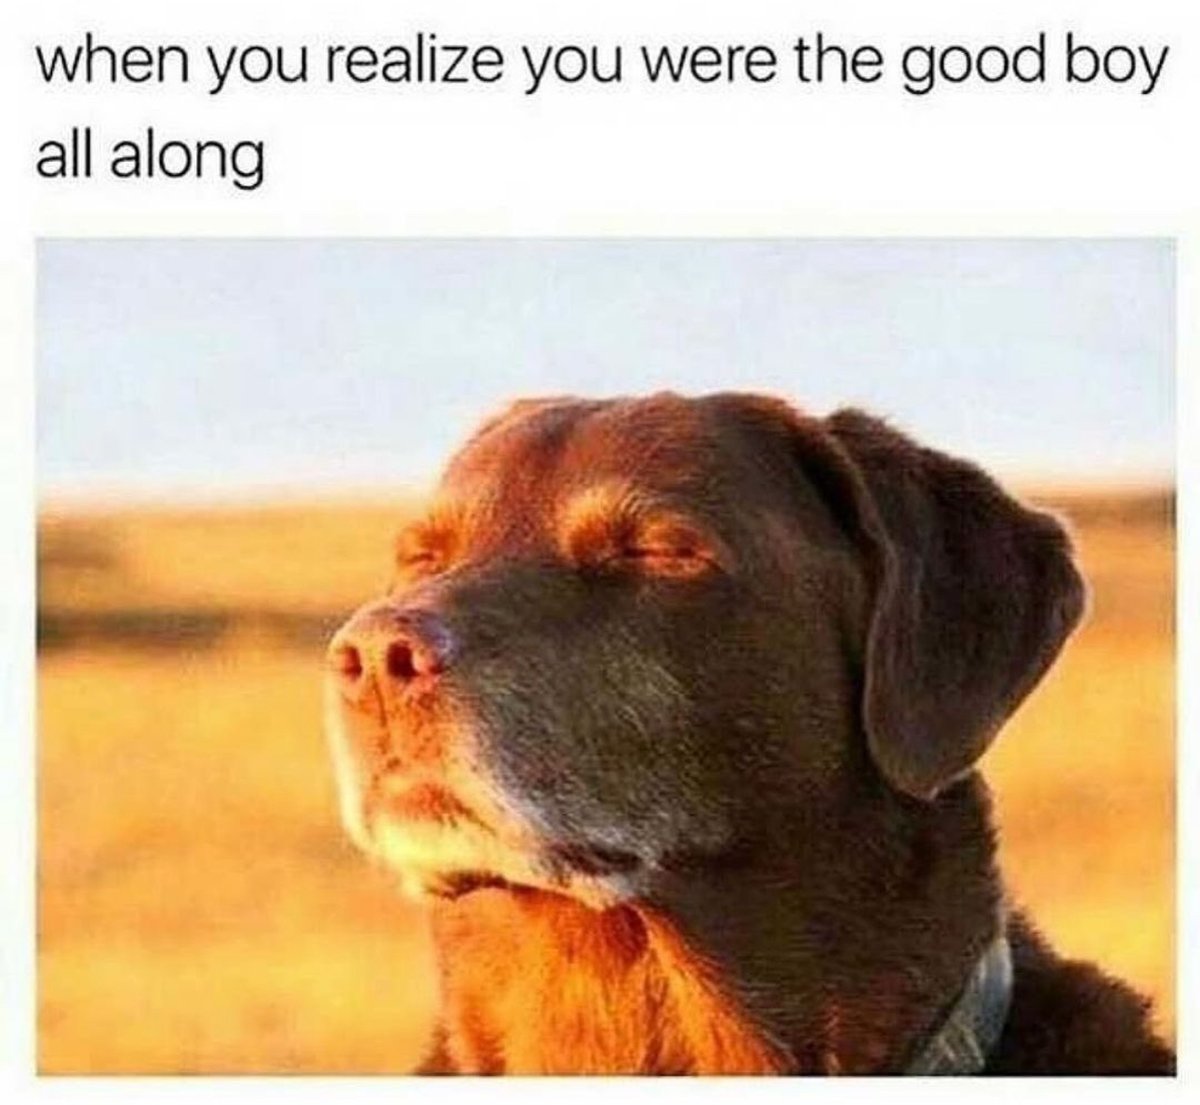 Embrace that 'good boy' glow, because it was within you all along! 🐾💖

credit:  @thedoggosdose

#doghumor #dogcomic #dogmeme #dogmomsclub #dogtreats #dogtreatsfordays #funnymemesdaily #funnycomic #dogfunny #dogtv #dogbestie